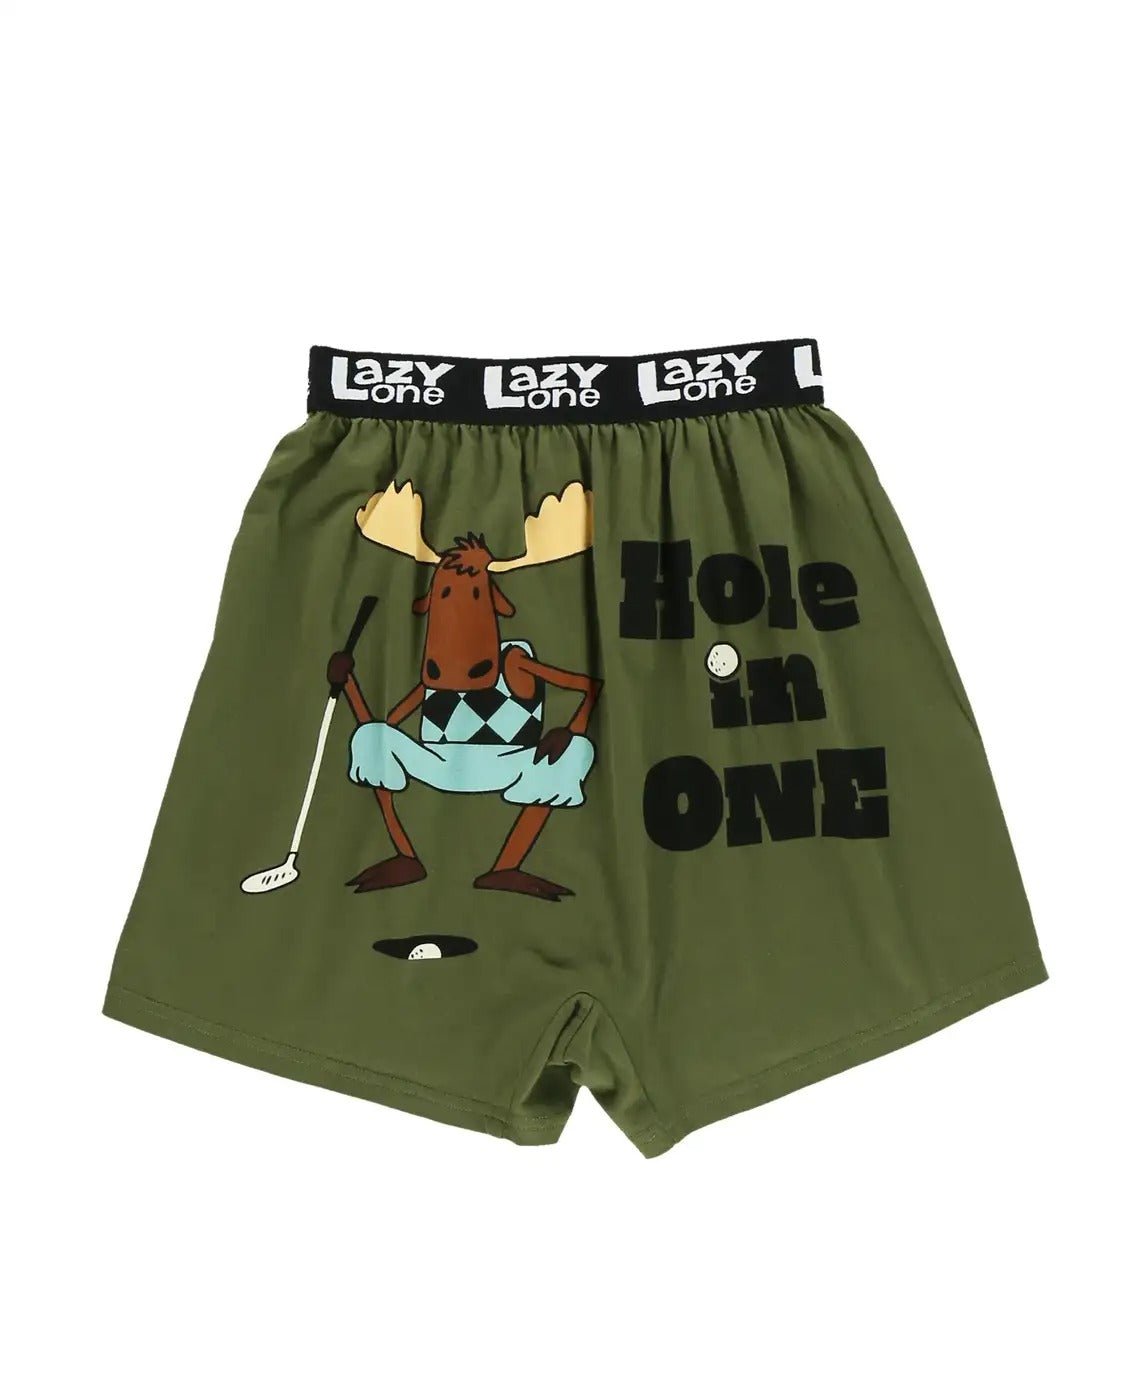 Hole In One Funny Boxer